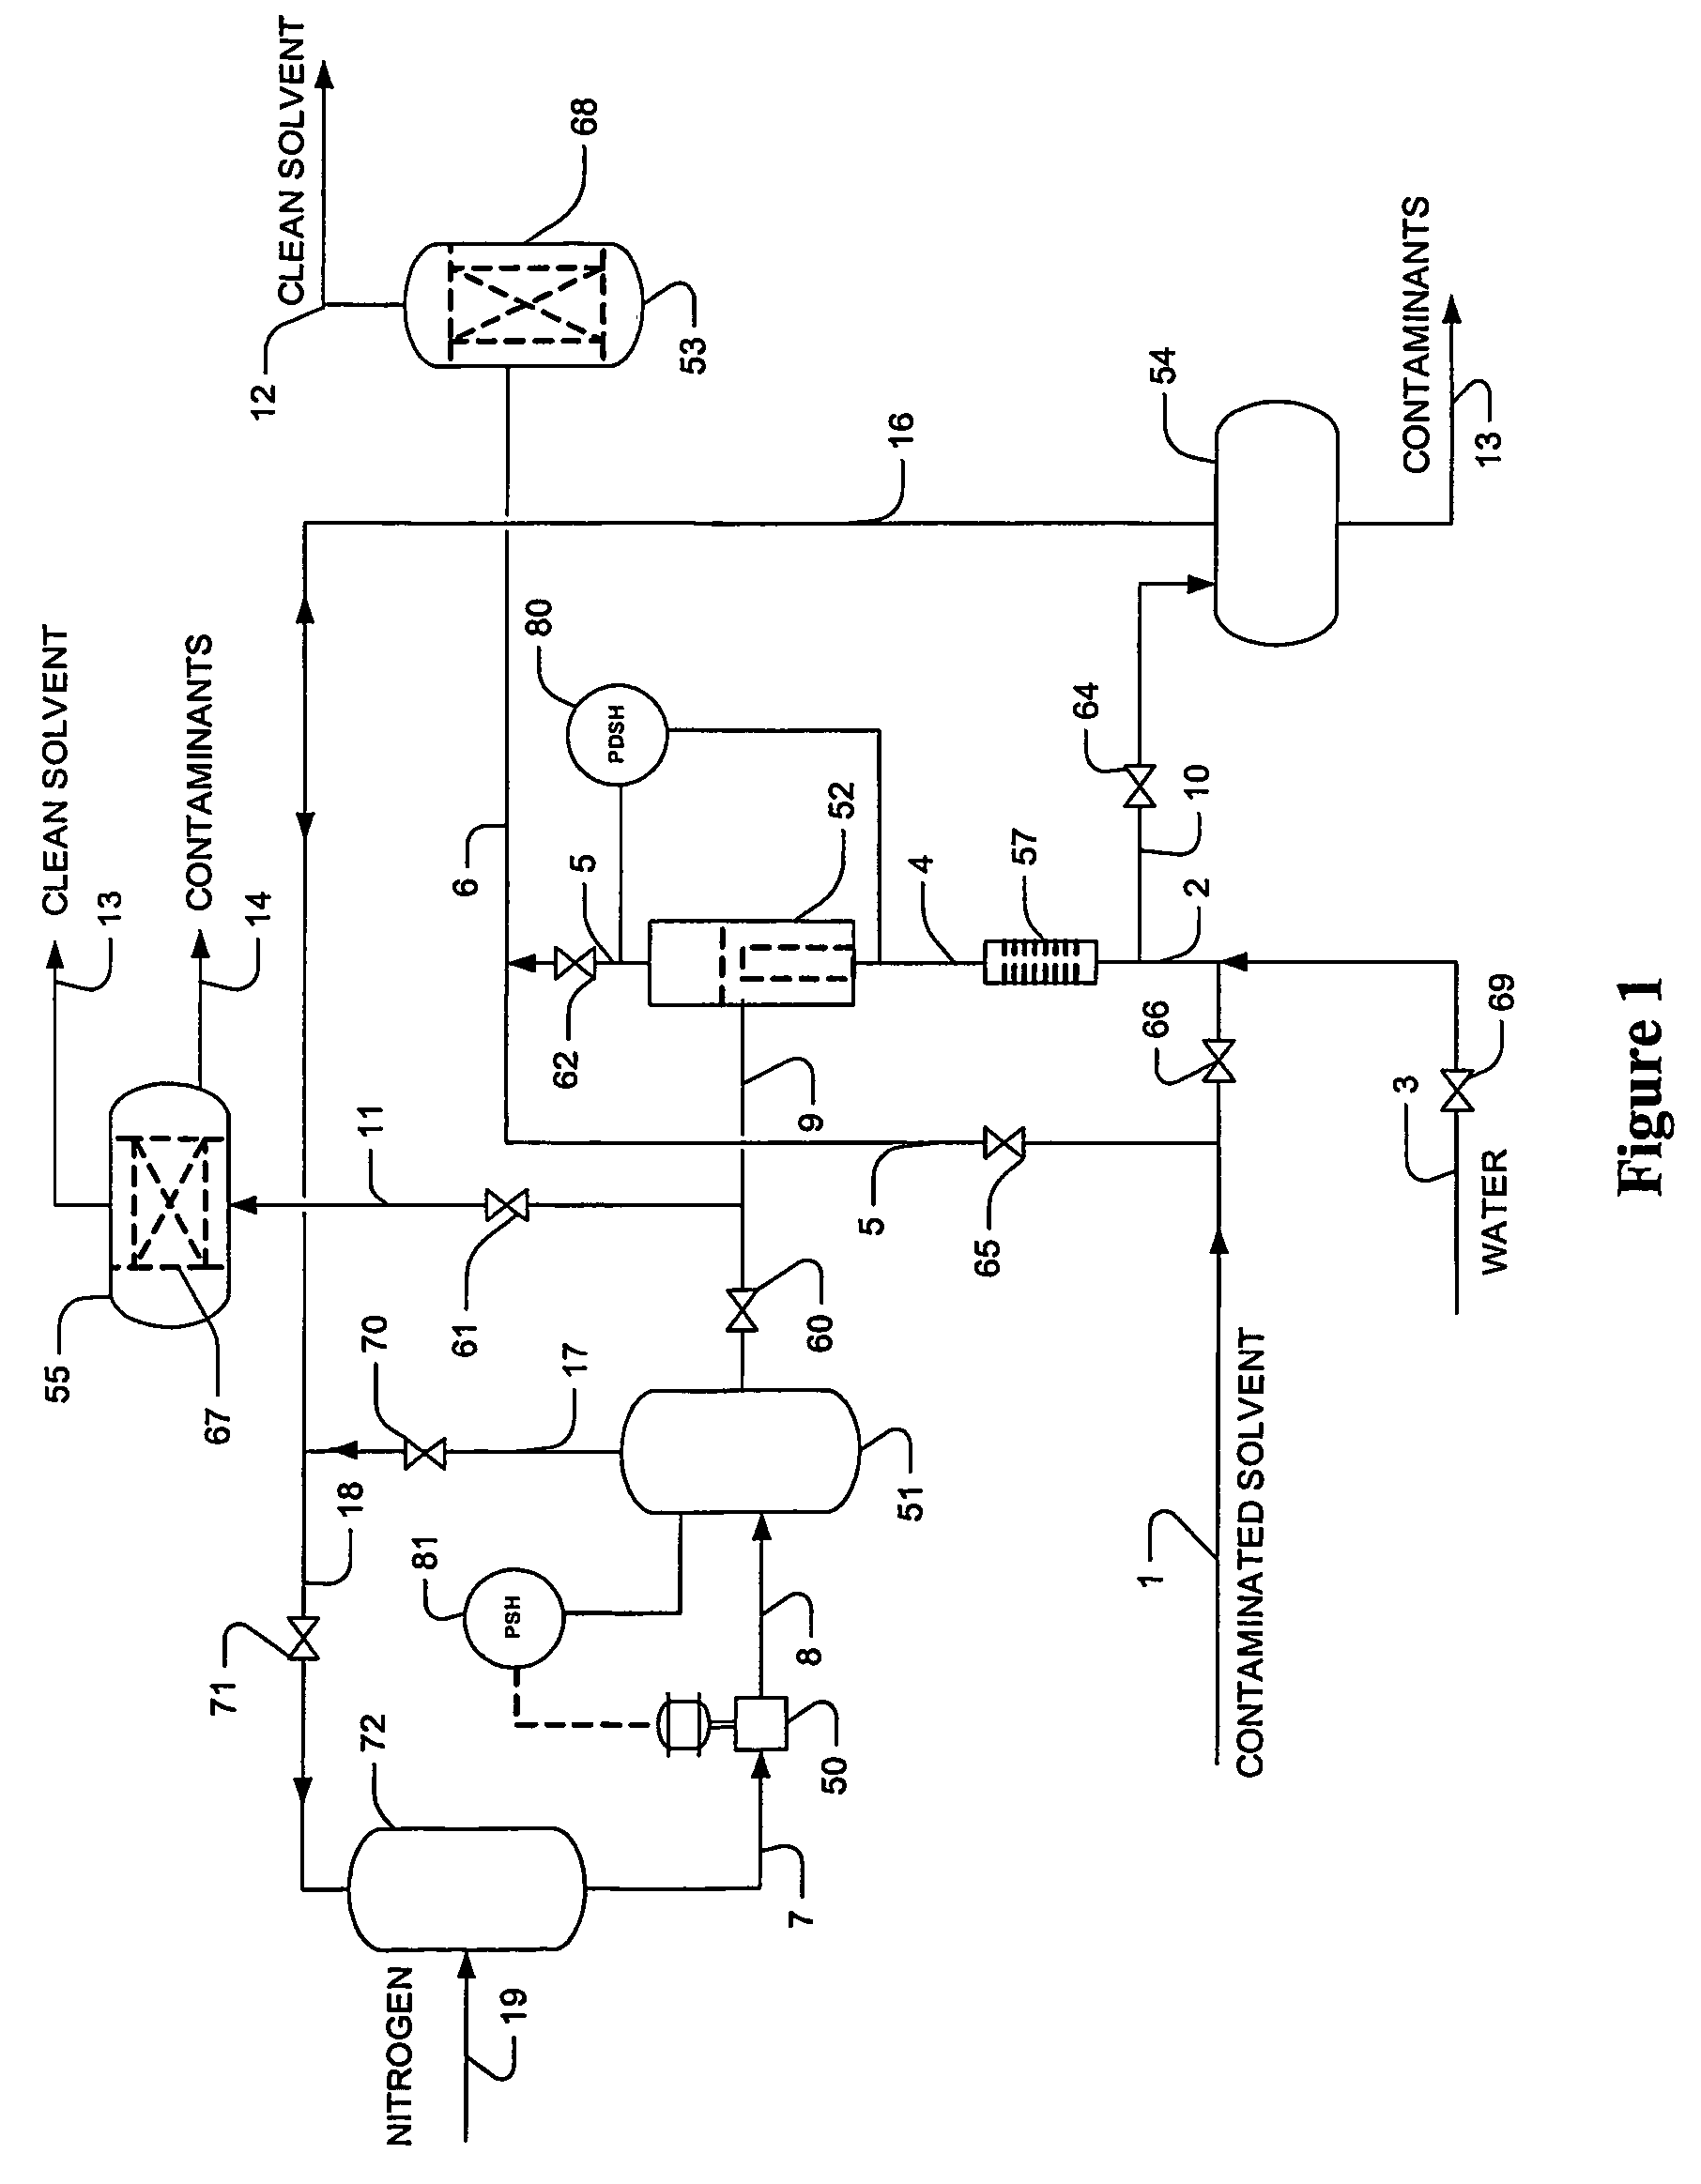 Solvent filtration system and methods